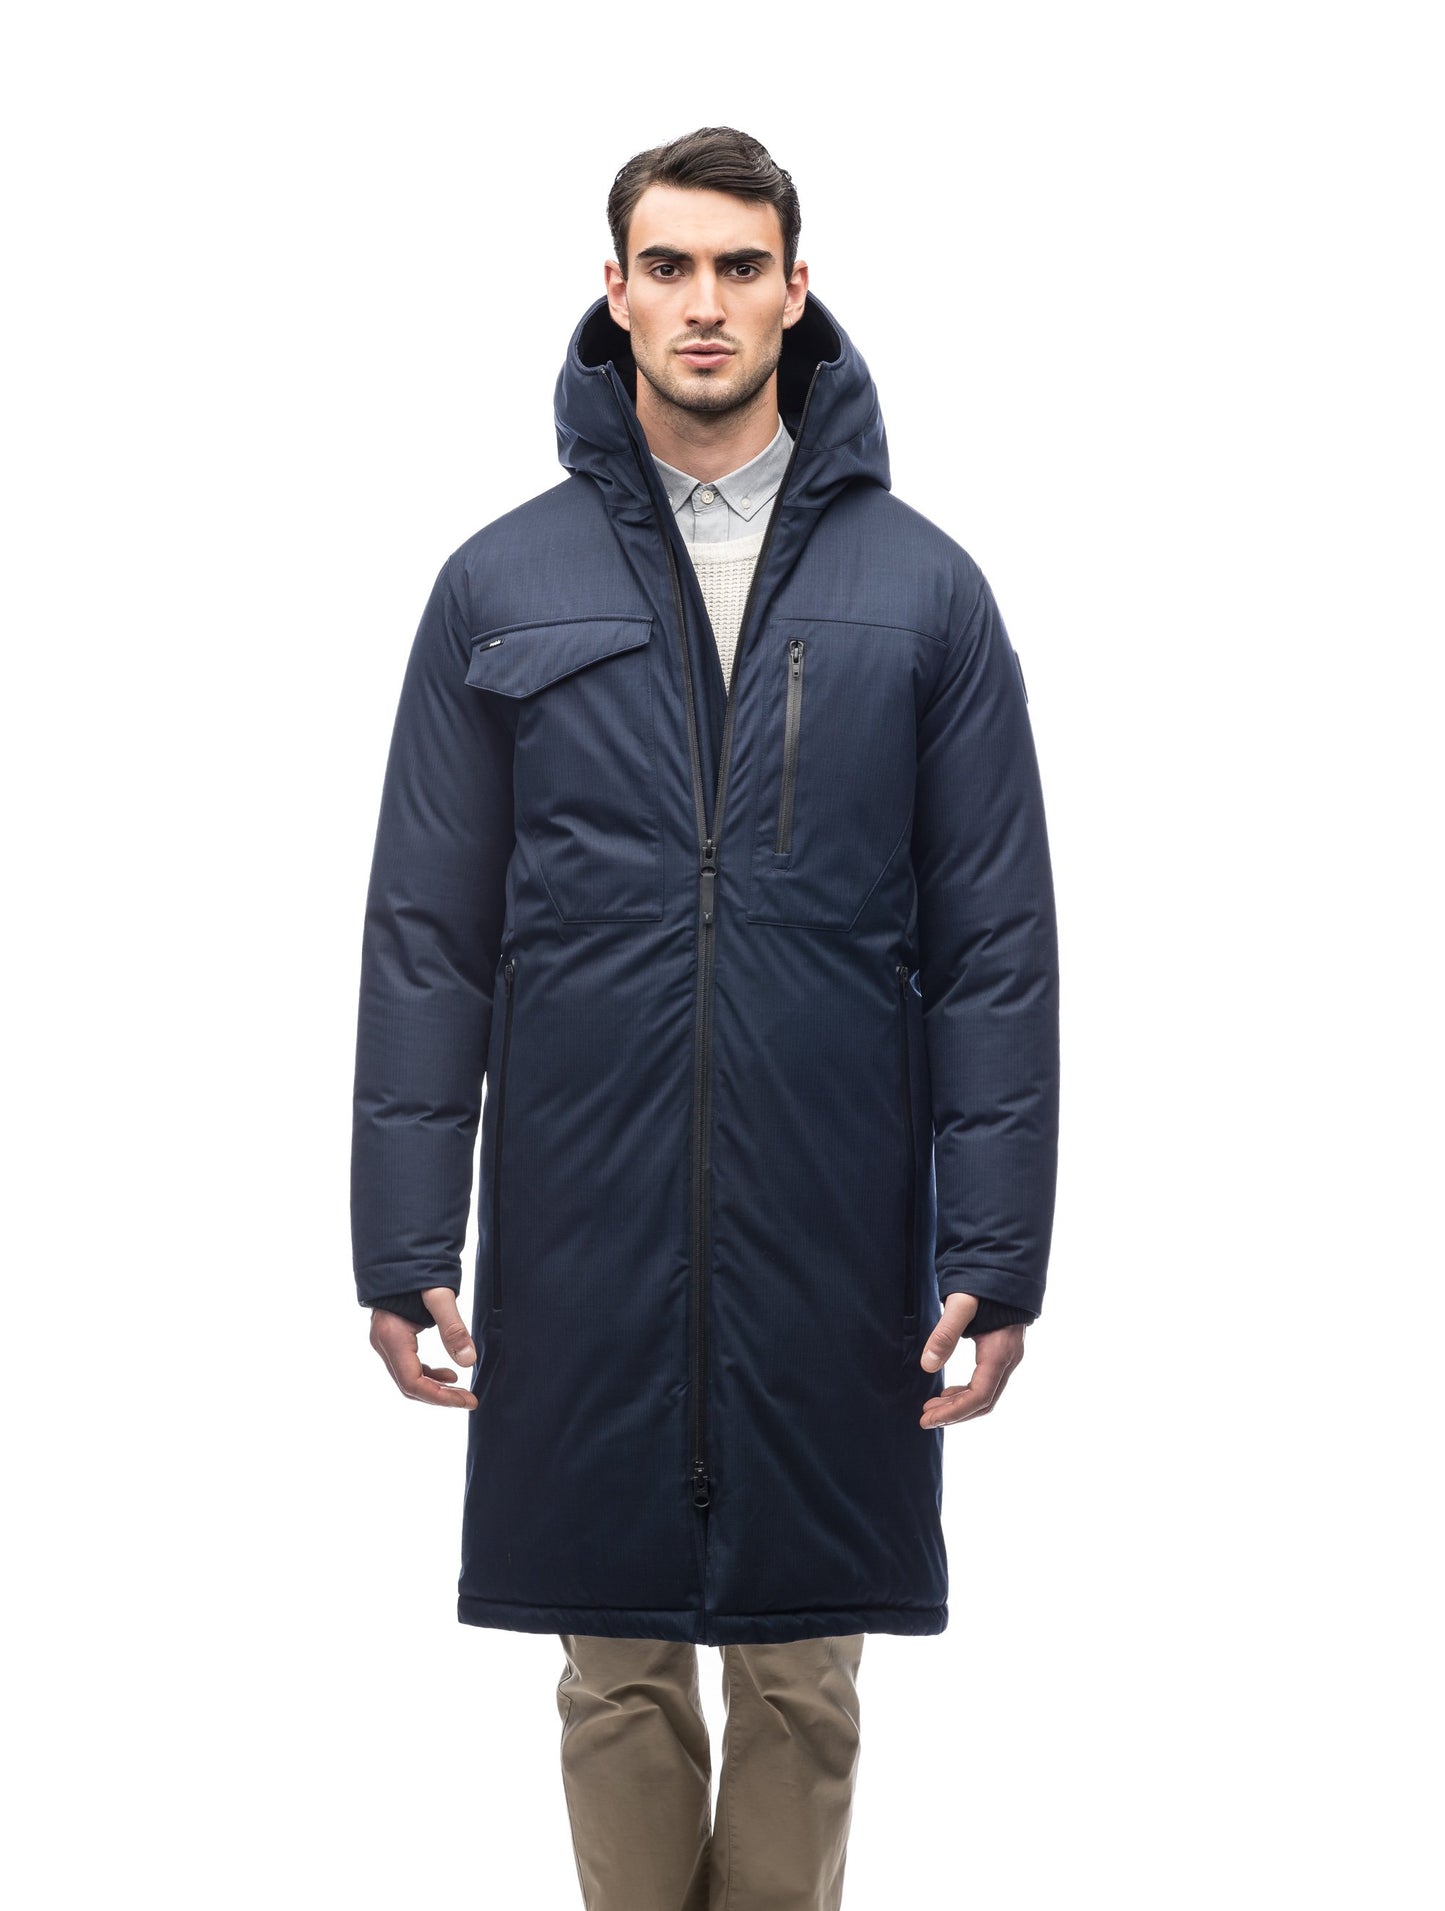 Long men's calf length parka with down fill and exposed zipper that features spacious pockets and zippered vents in Navy